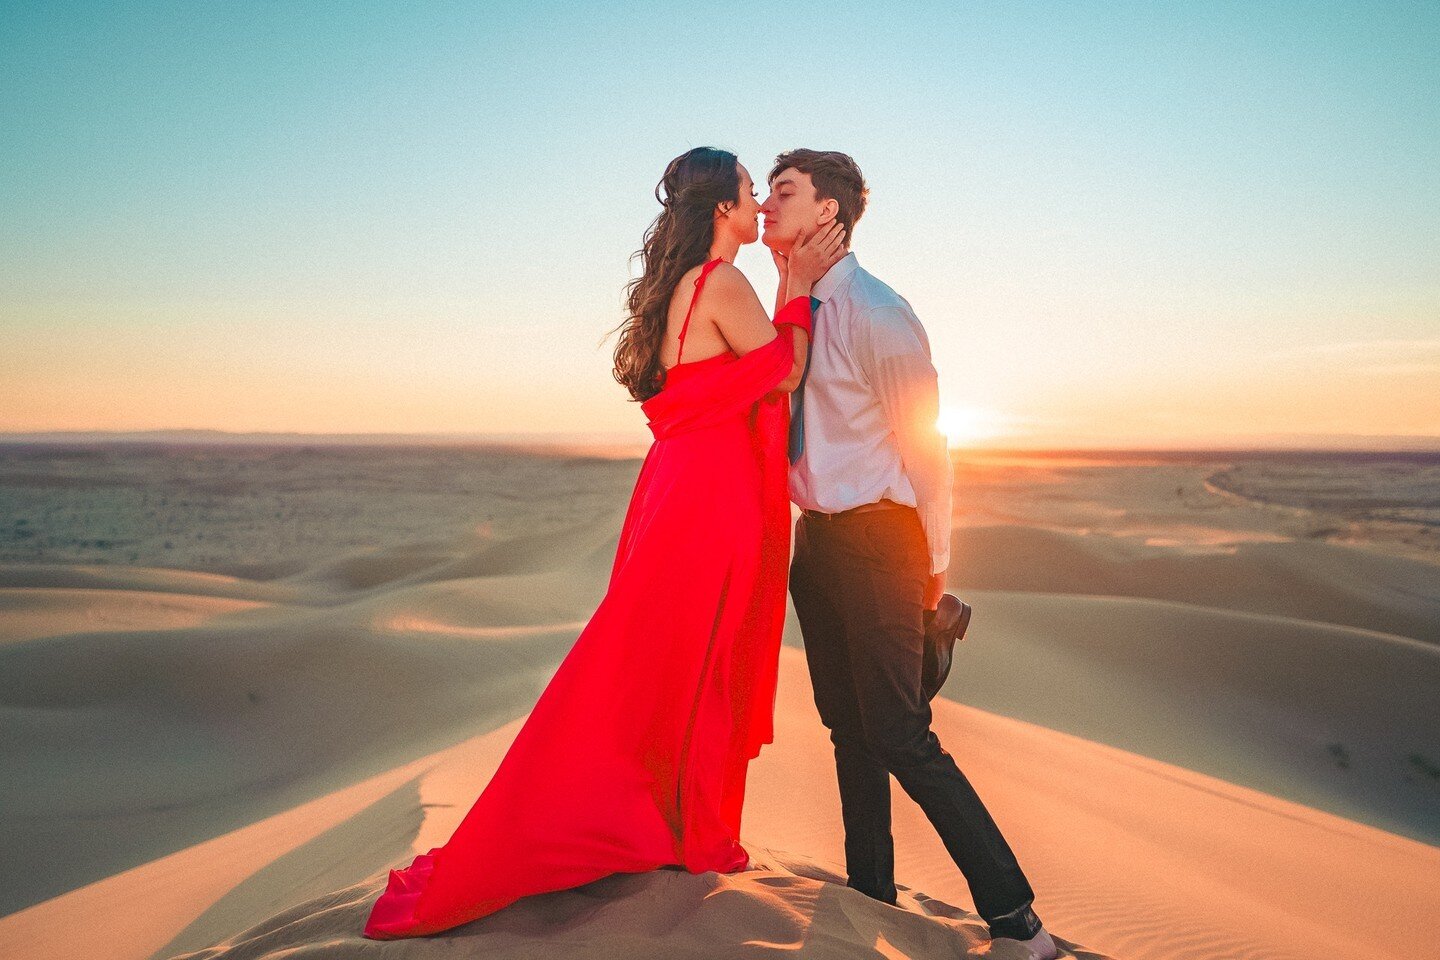 Embarking on a visual odyssey with John + Ewelina's engagement shoot! 🌄 Their love story unfolds like a cinematic masterpiece. 🏜️✨ Armed with a drone, we soared to capture their tale from new heights, embracing the challenge of relentless winds. De